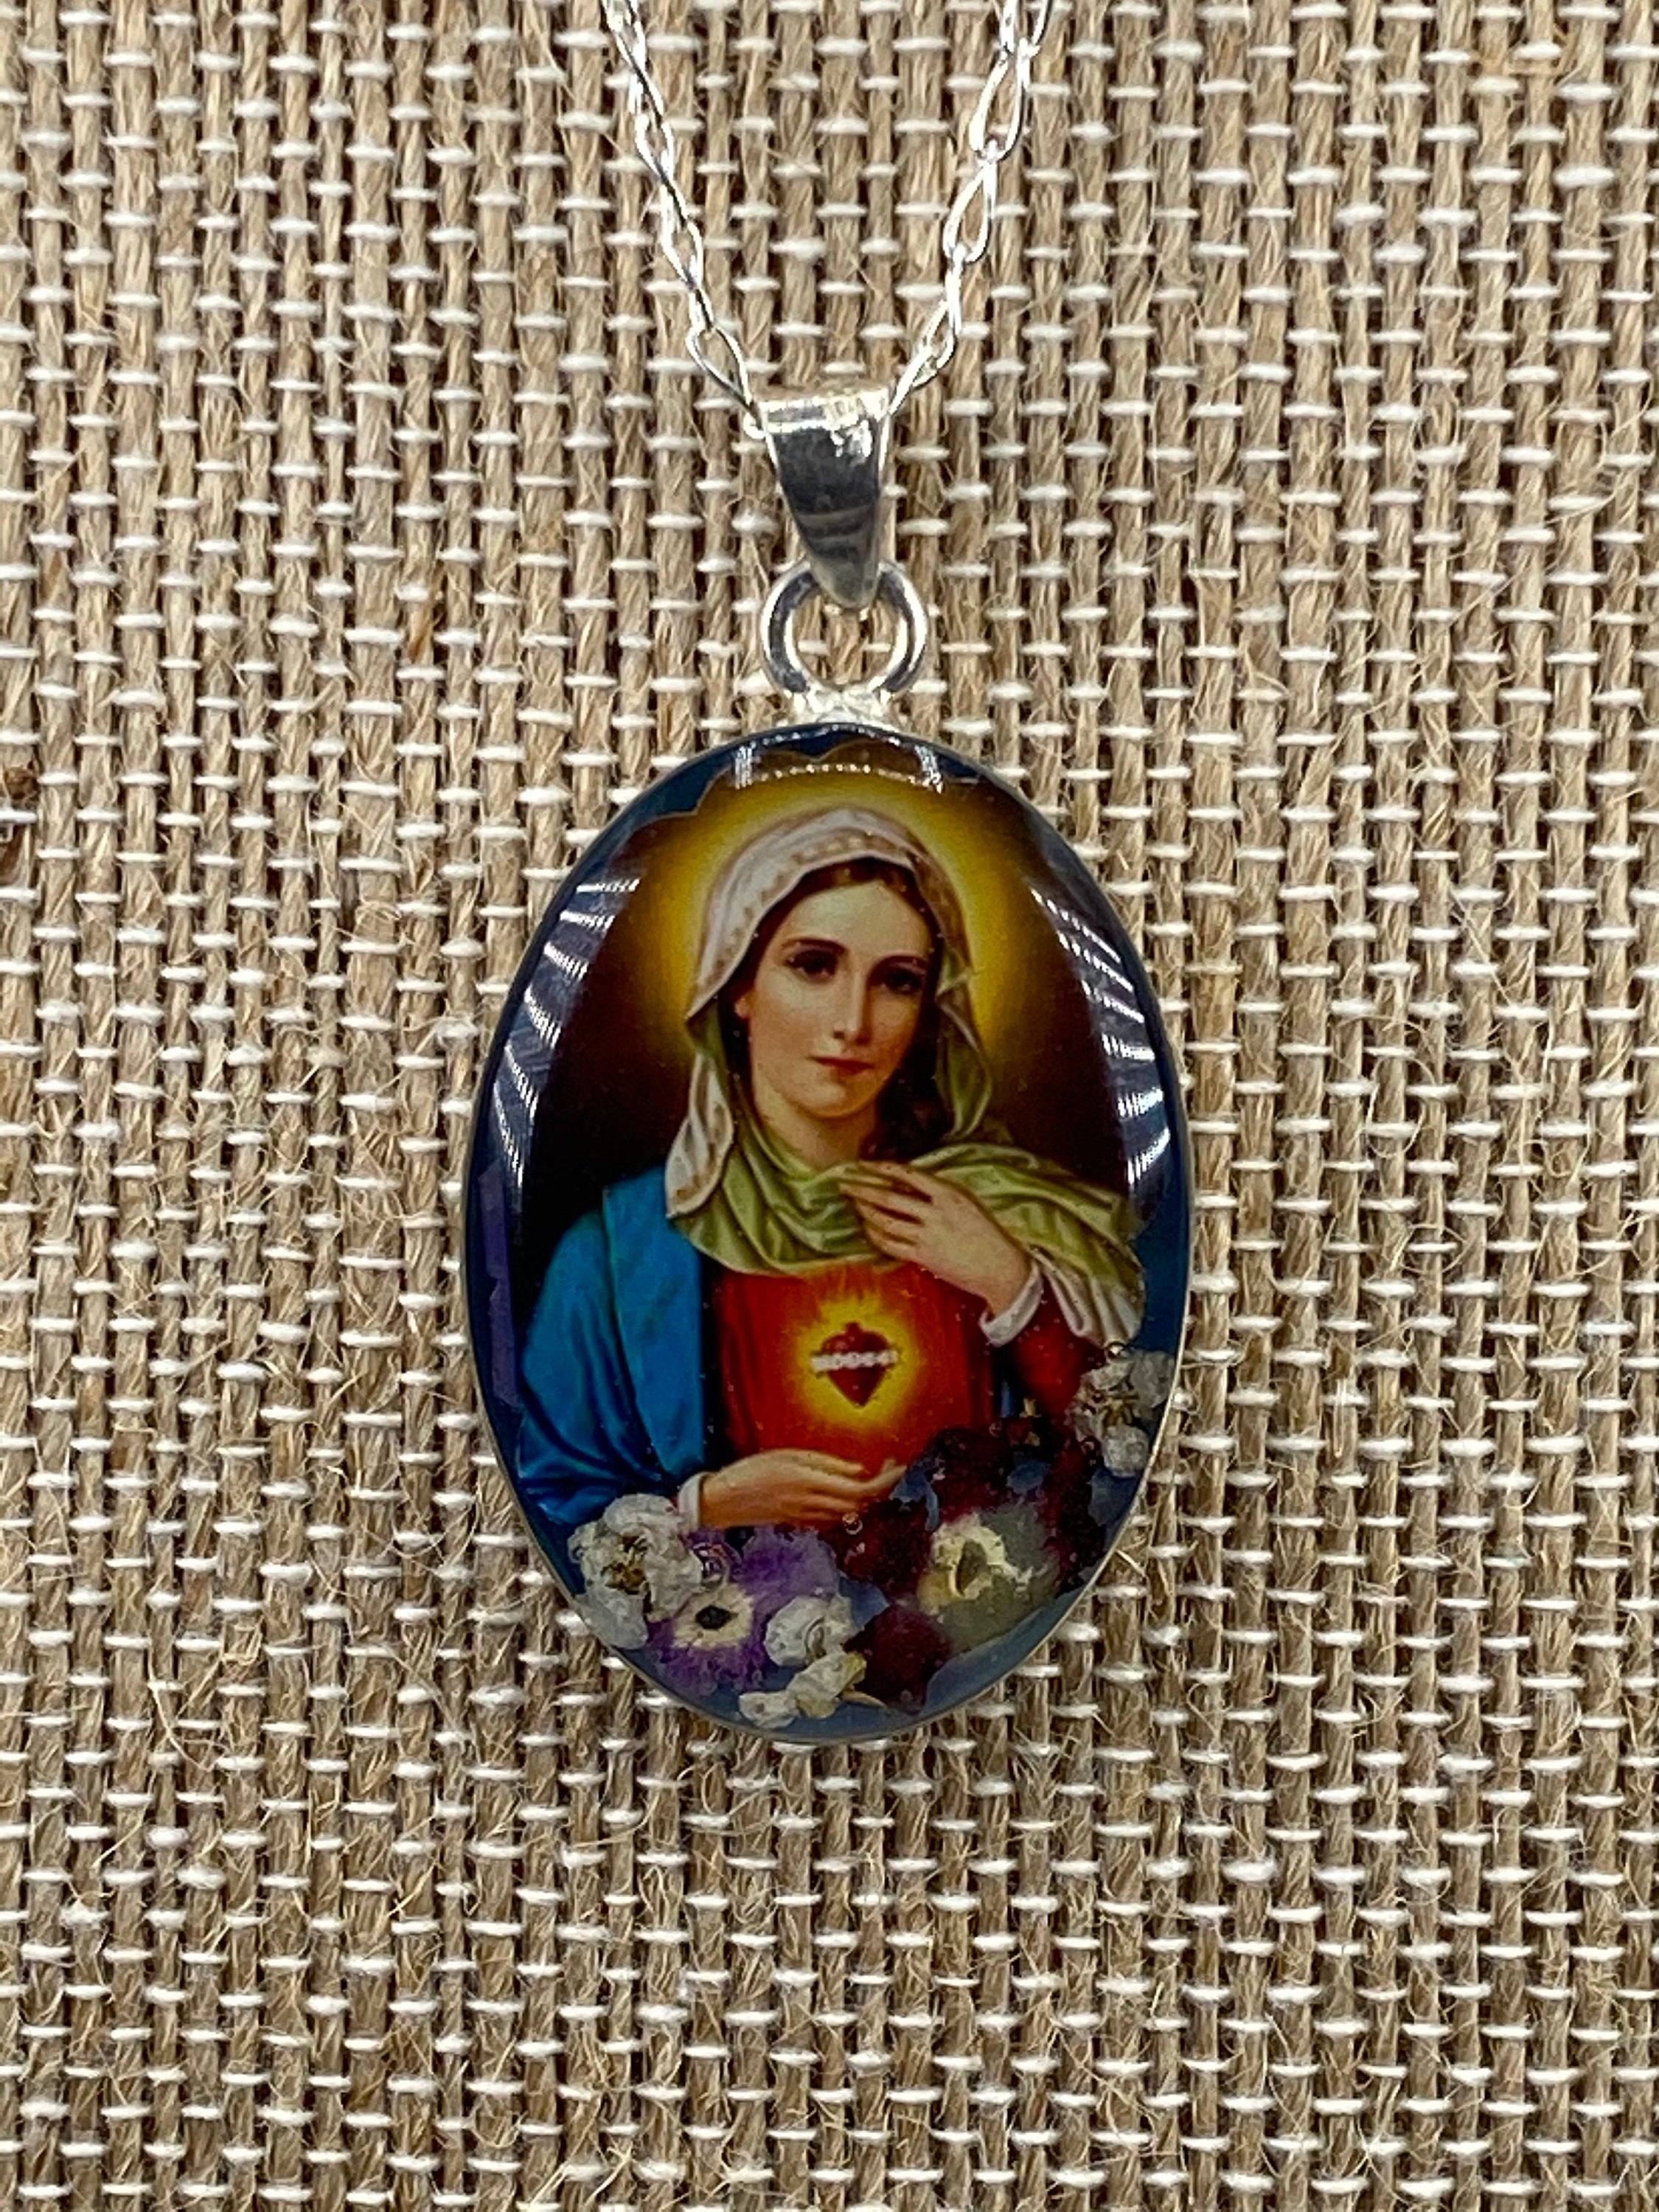 Immaculate Heart of Mary / Inmaculado Corazon de Maria - Guadalupe Collection